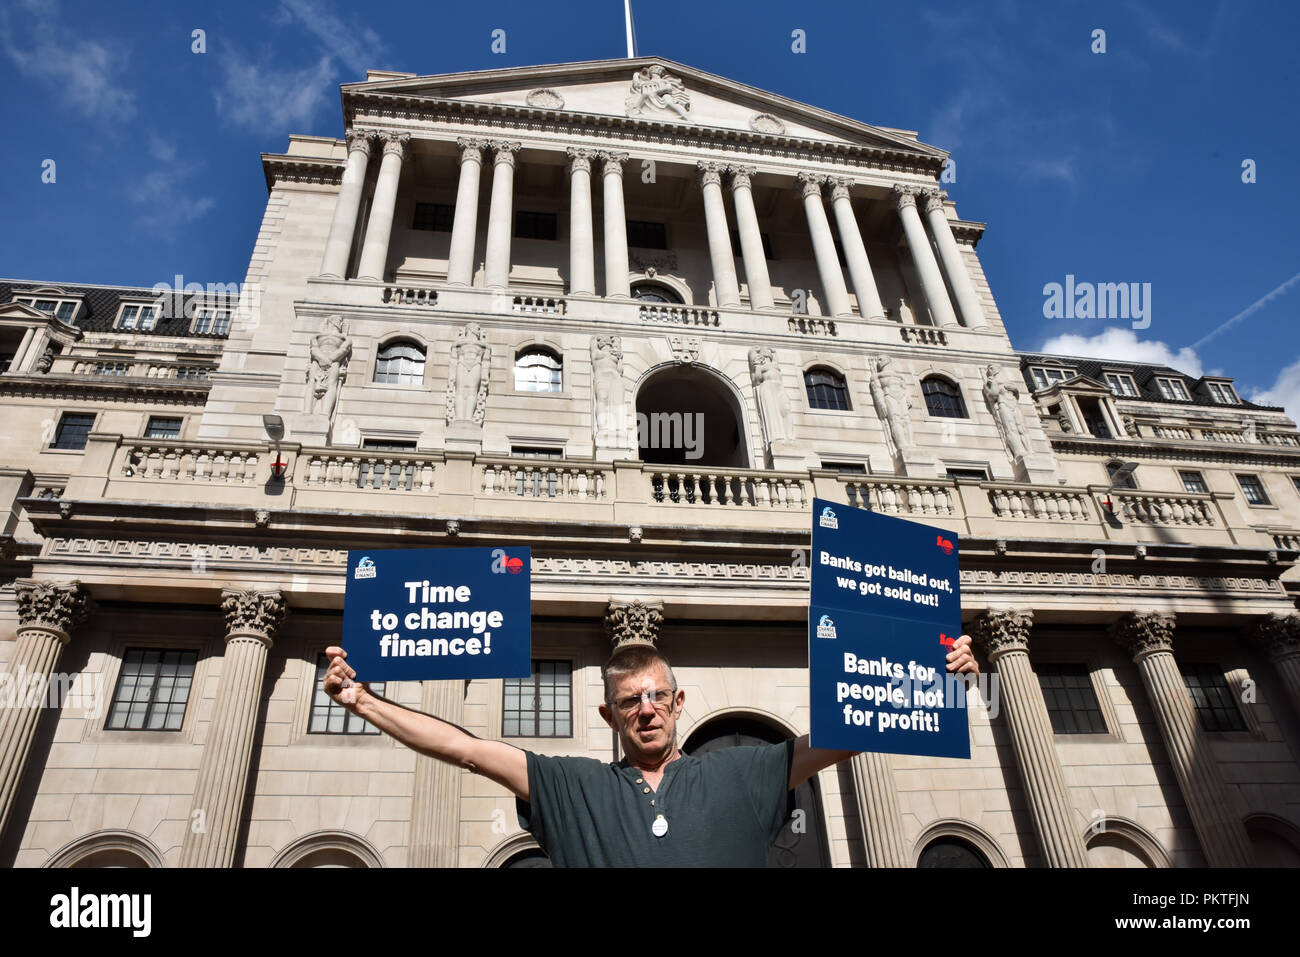 Bank, London, UK. 15th September 2018. Demonstration opposite the Bank of England on the 10th anniversary of the collapse of Lehman Brothers bank which lead to the global financial crisis. Credit: Matthew Chattle/Alamy Live News Stock Photo